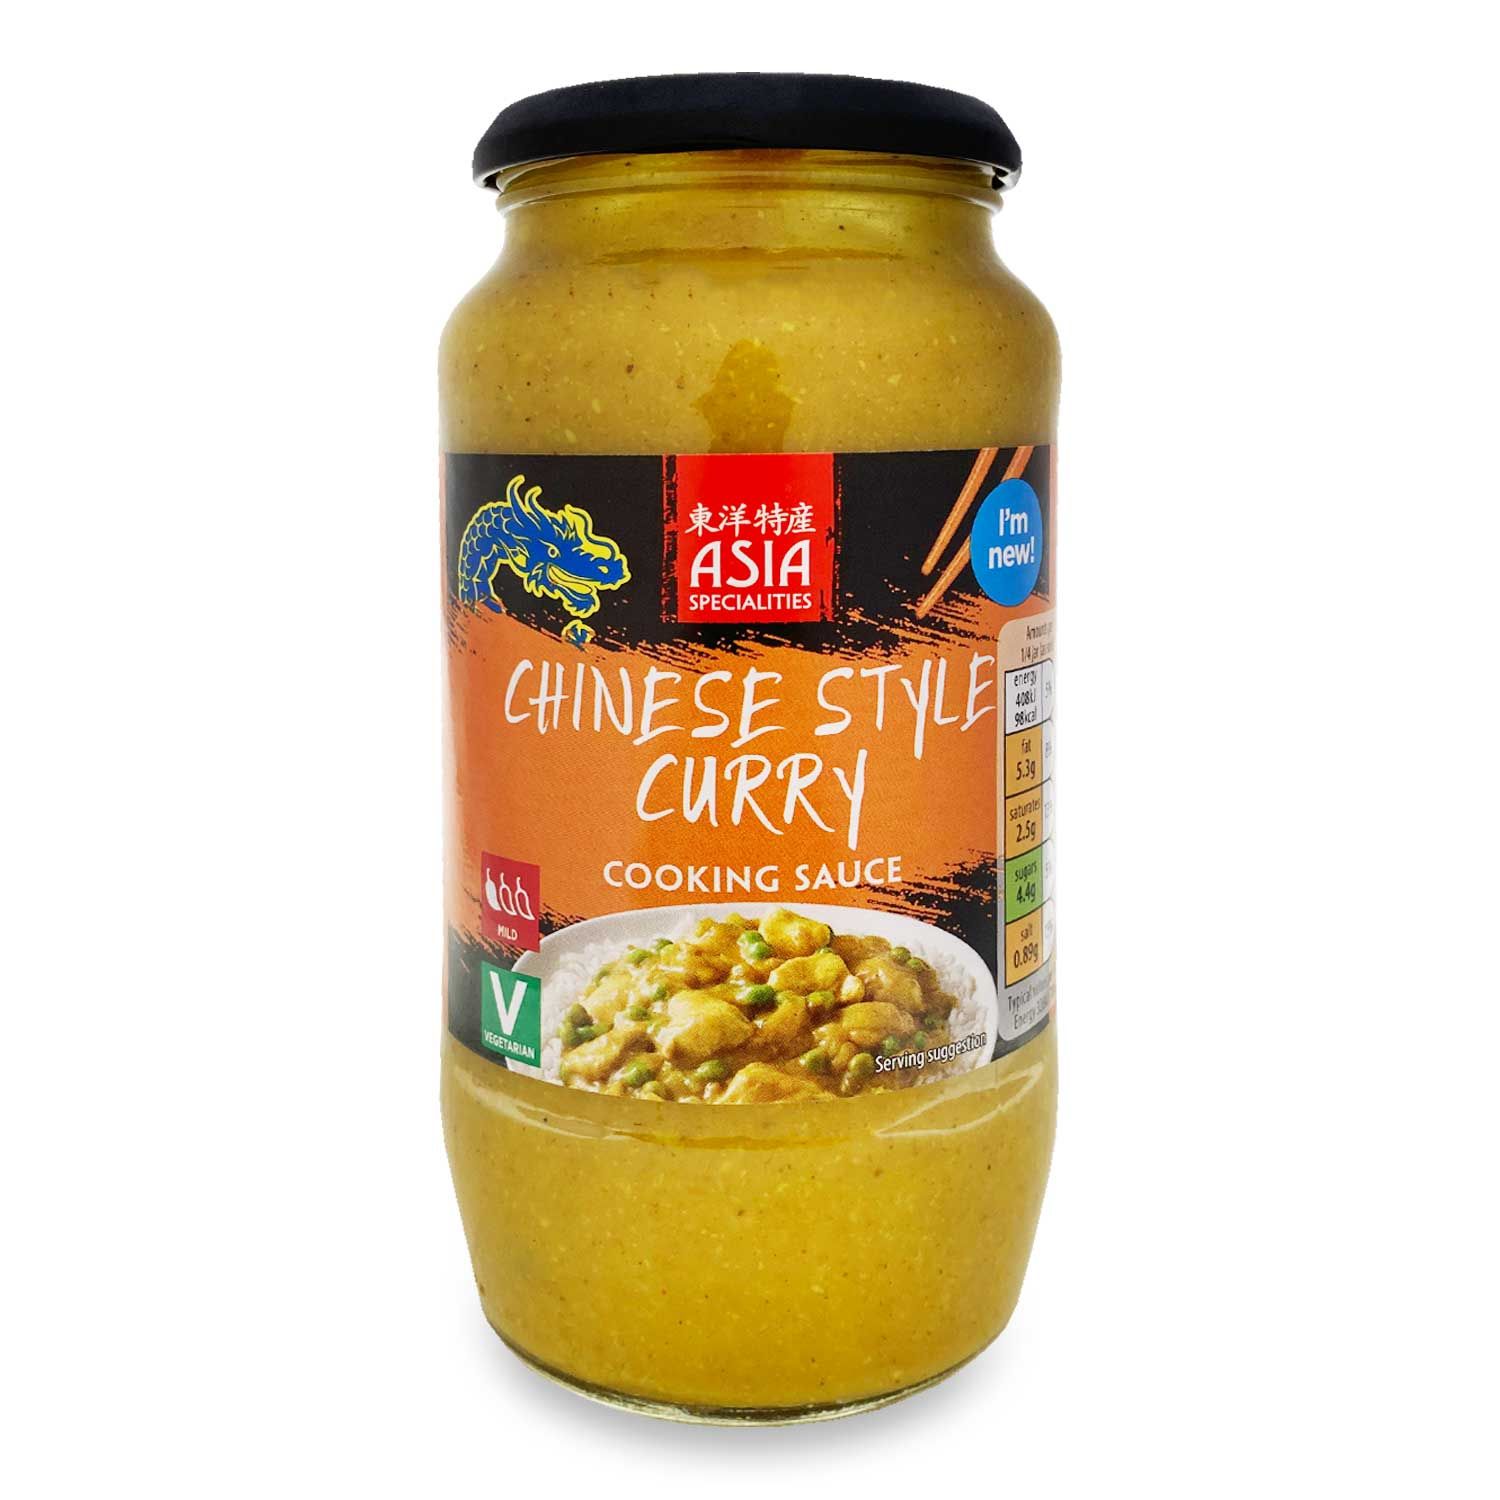 Chinese Style Curry Cooking Sauce 500g Asia Specialities | ALDI.IE